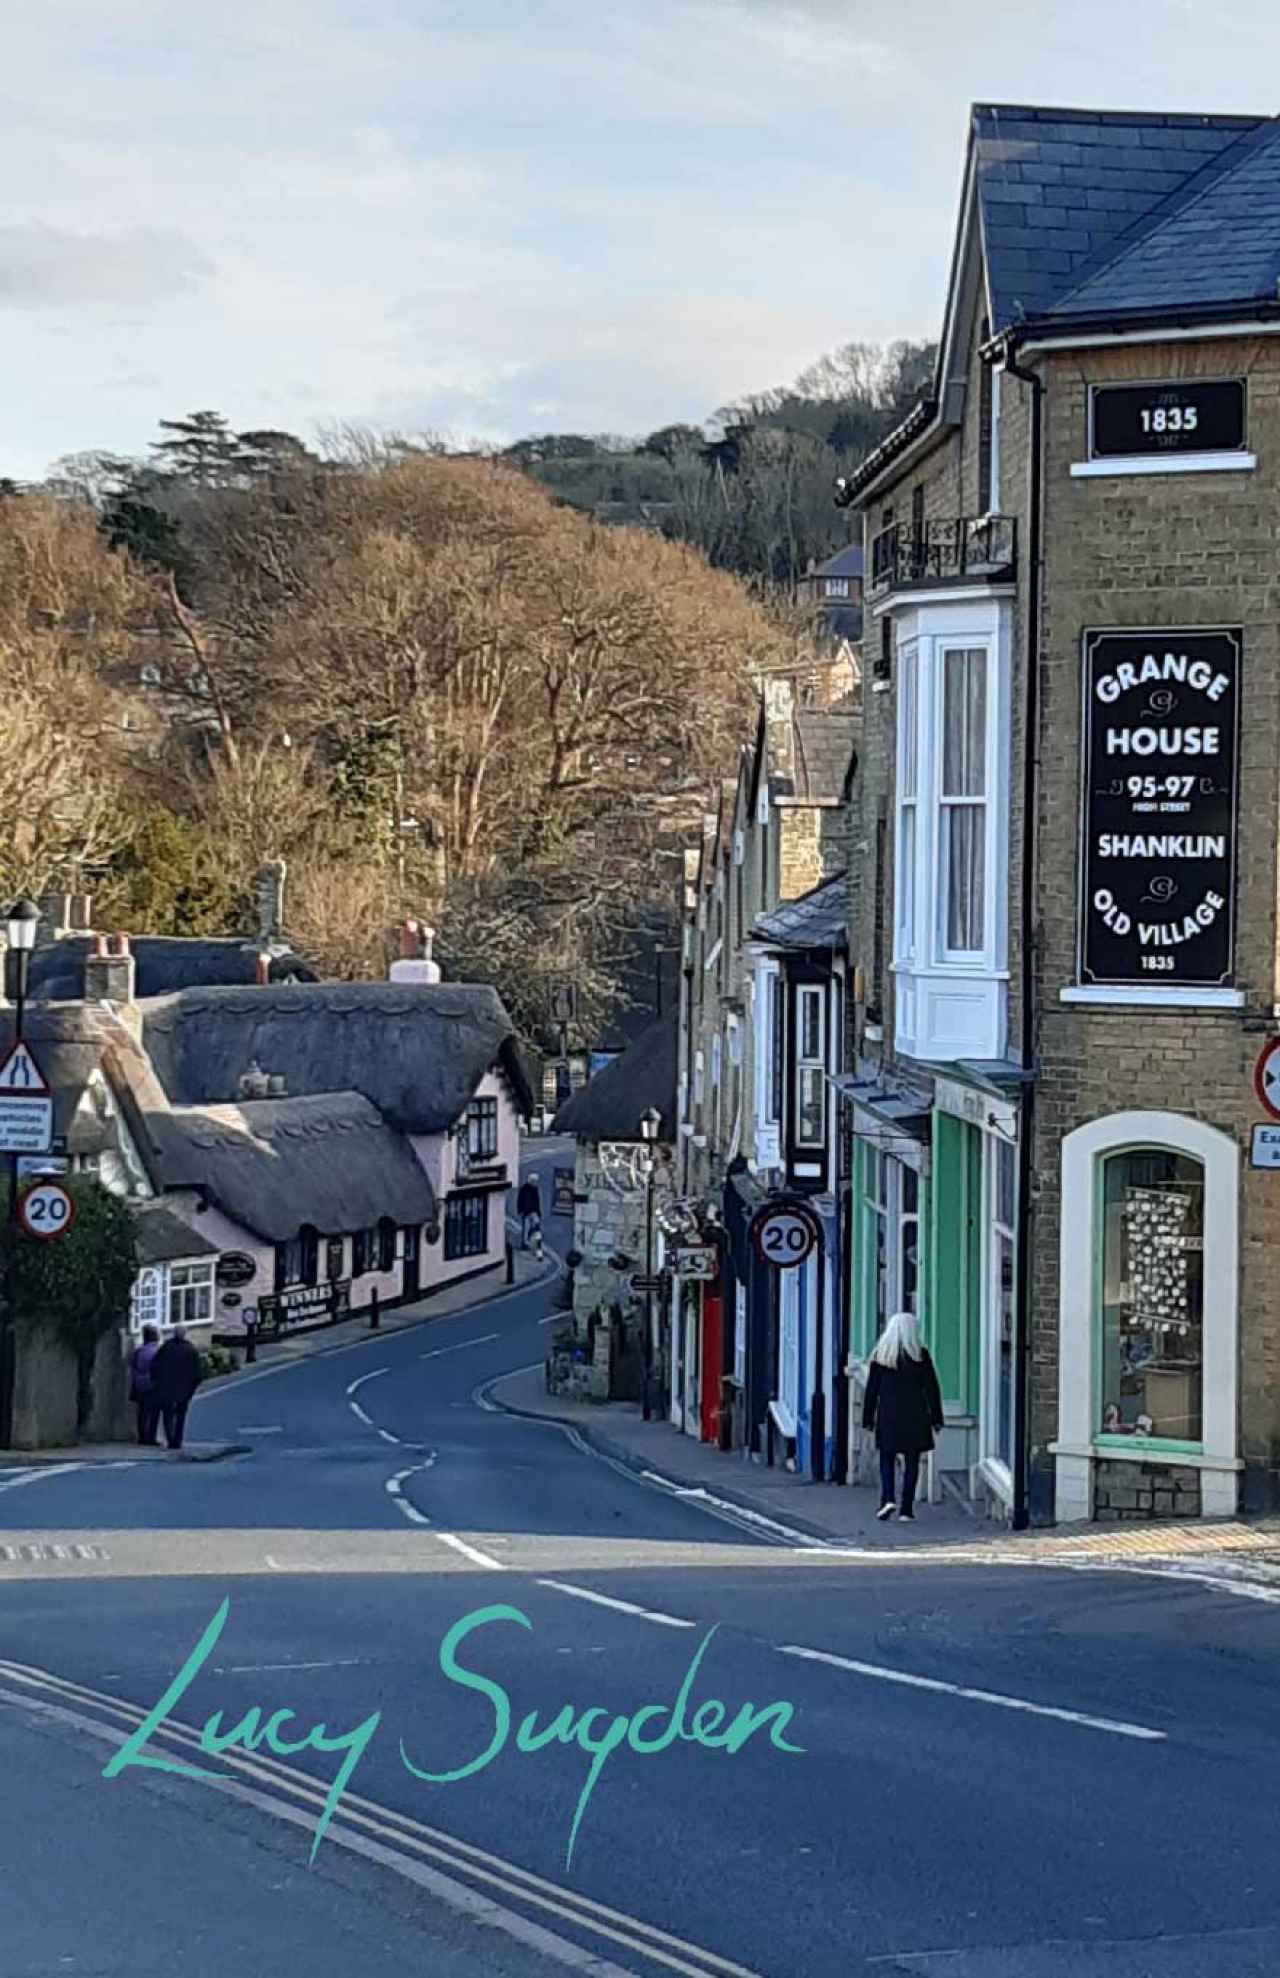 Shanklin Old Village in Isle of Wight